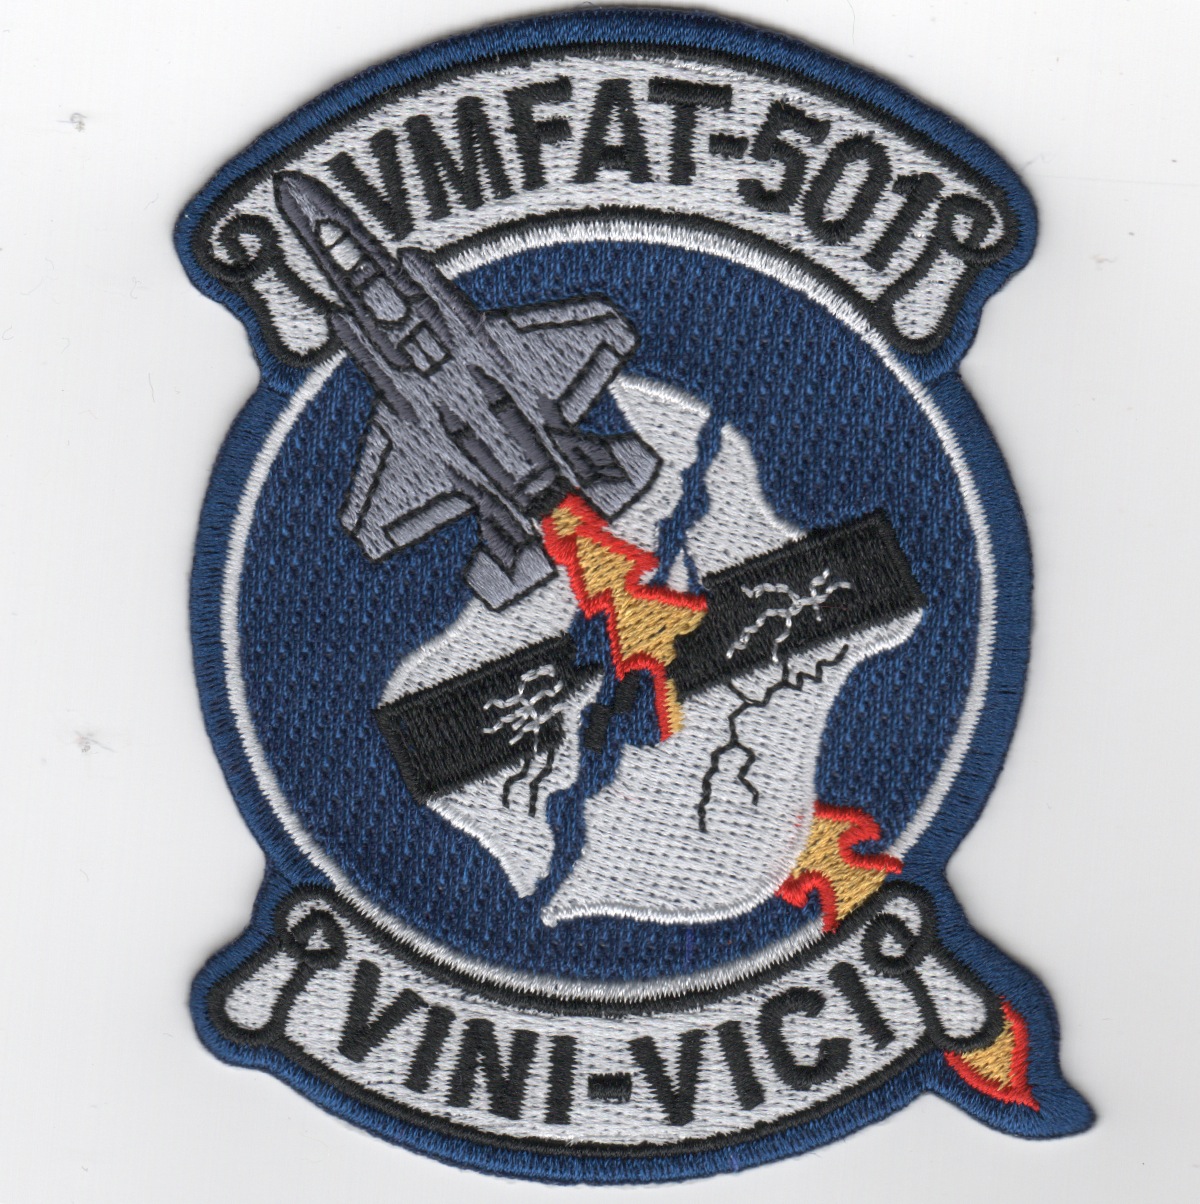 VMFAT-501 Squadron Patch (F-35)